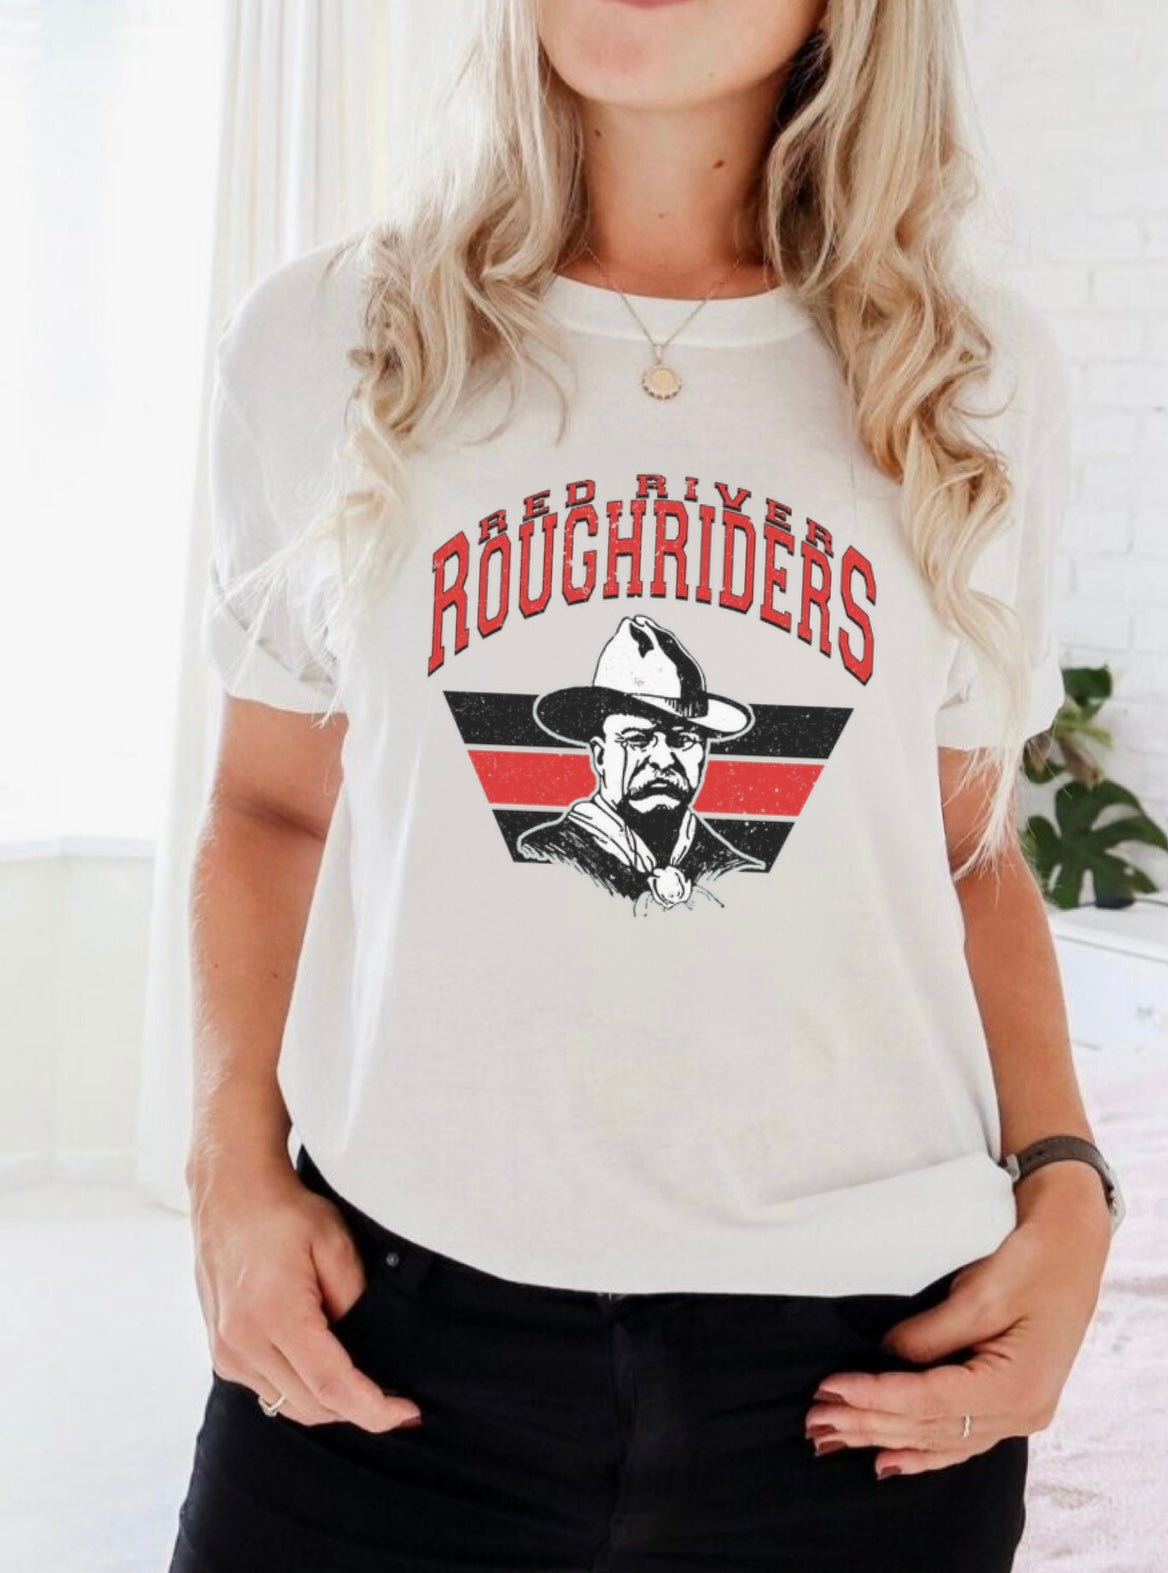 Red River Roughriders